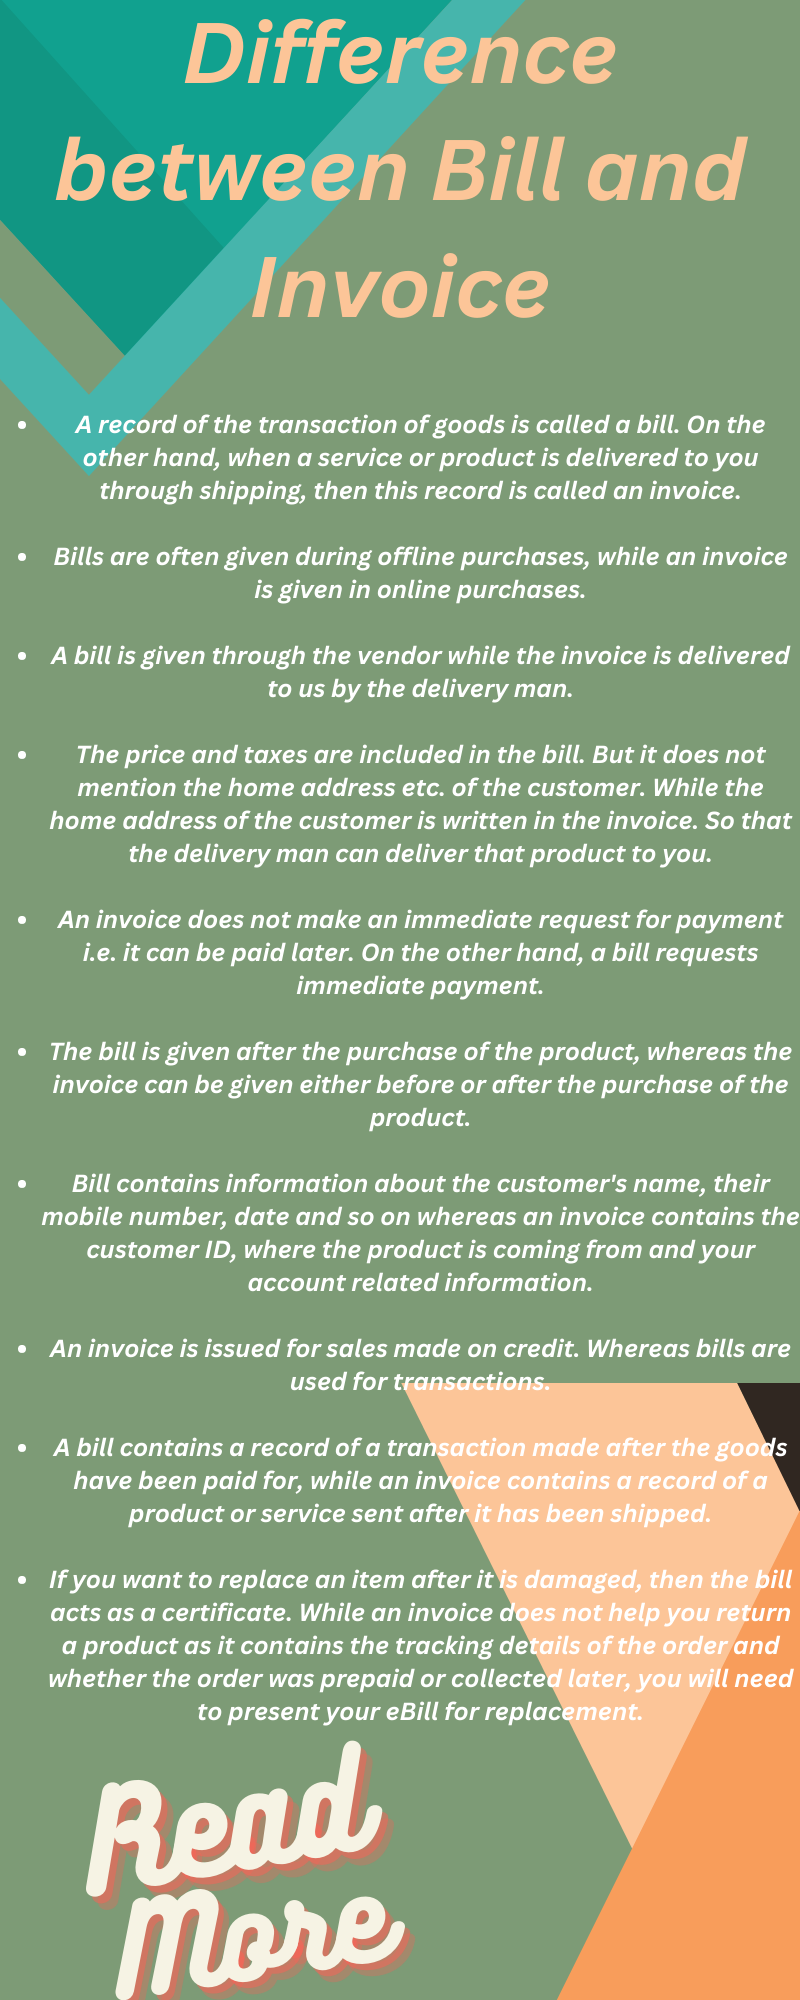 What are The Difference Between Bill and Invoice